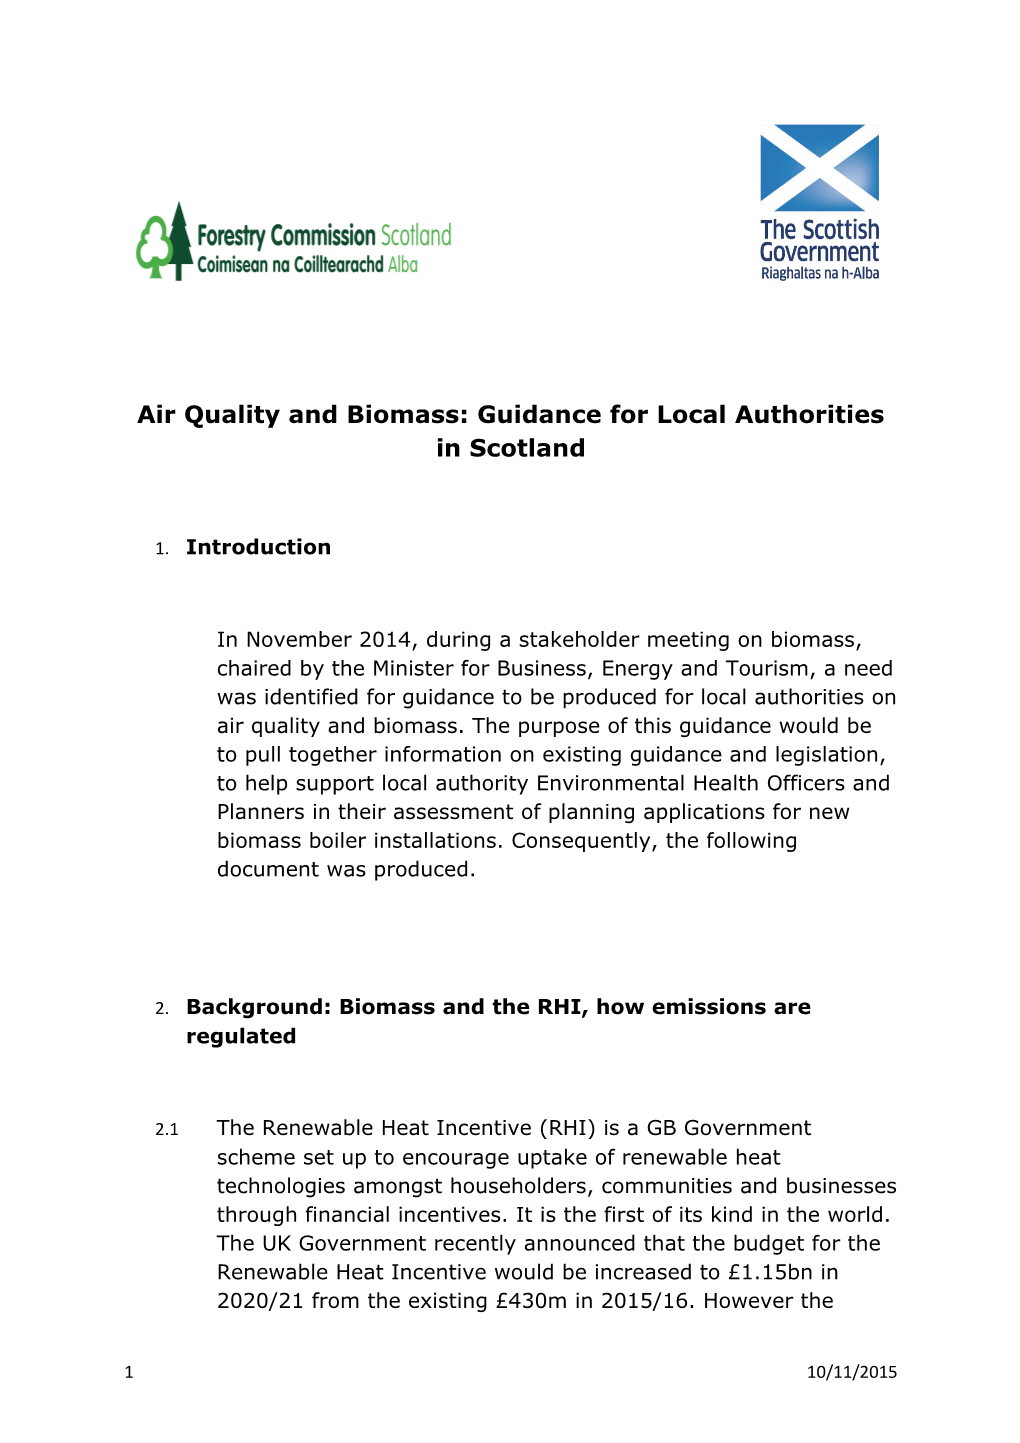 Air Quality and Biomass: Planning Guidance for Local Authorities in Scotland